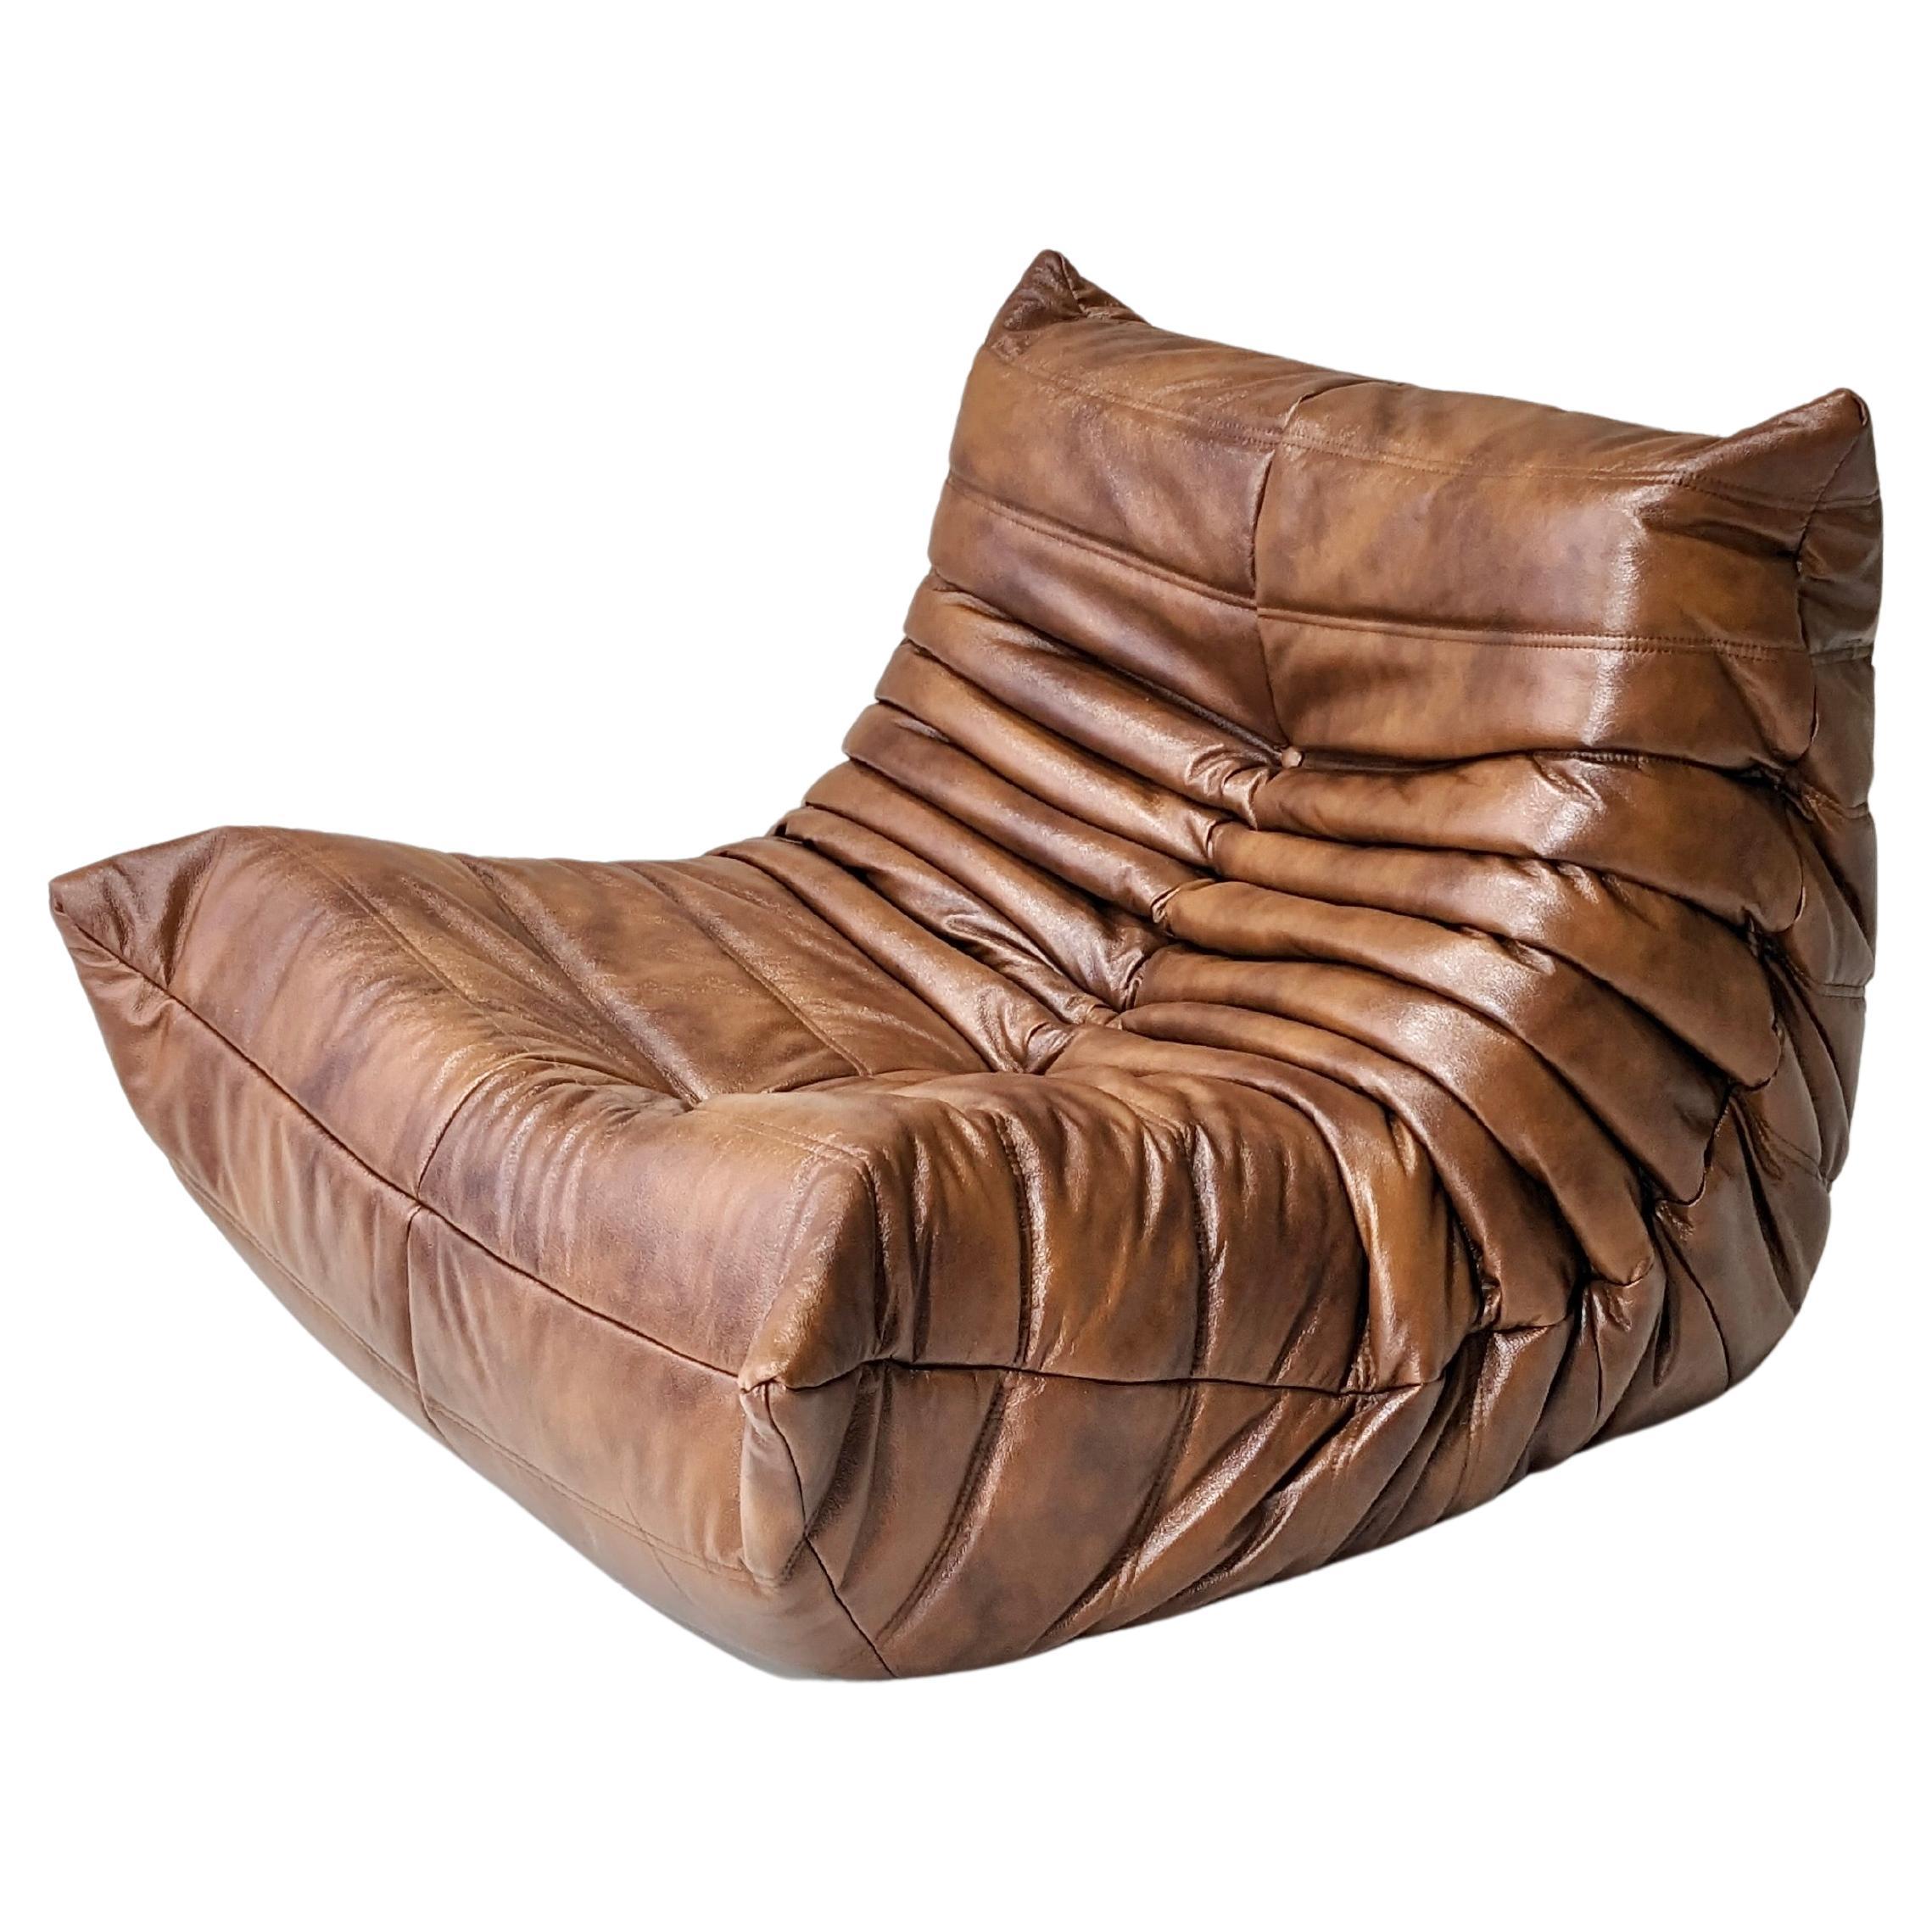 Togo "Chauffeuse" Model in Brown Leather by Michel Ducaroy for Ligne Roset For Sale